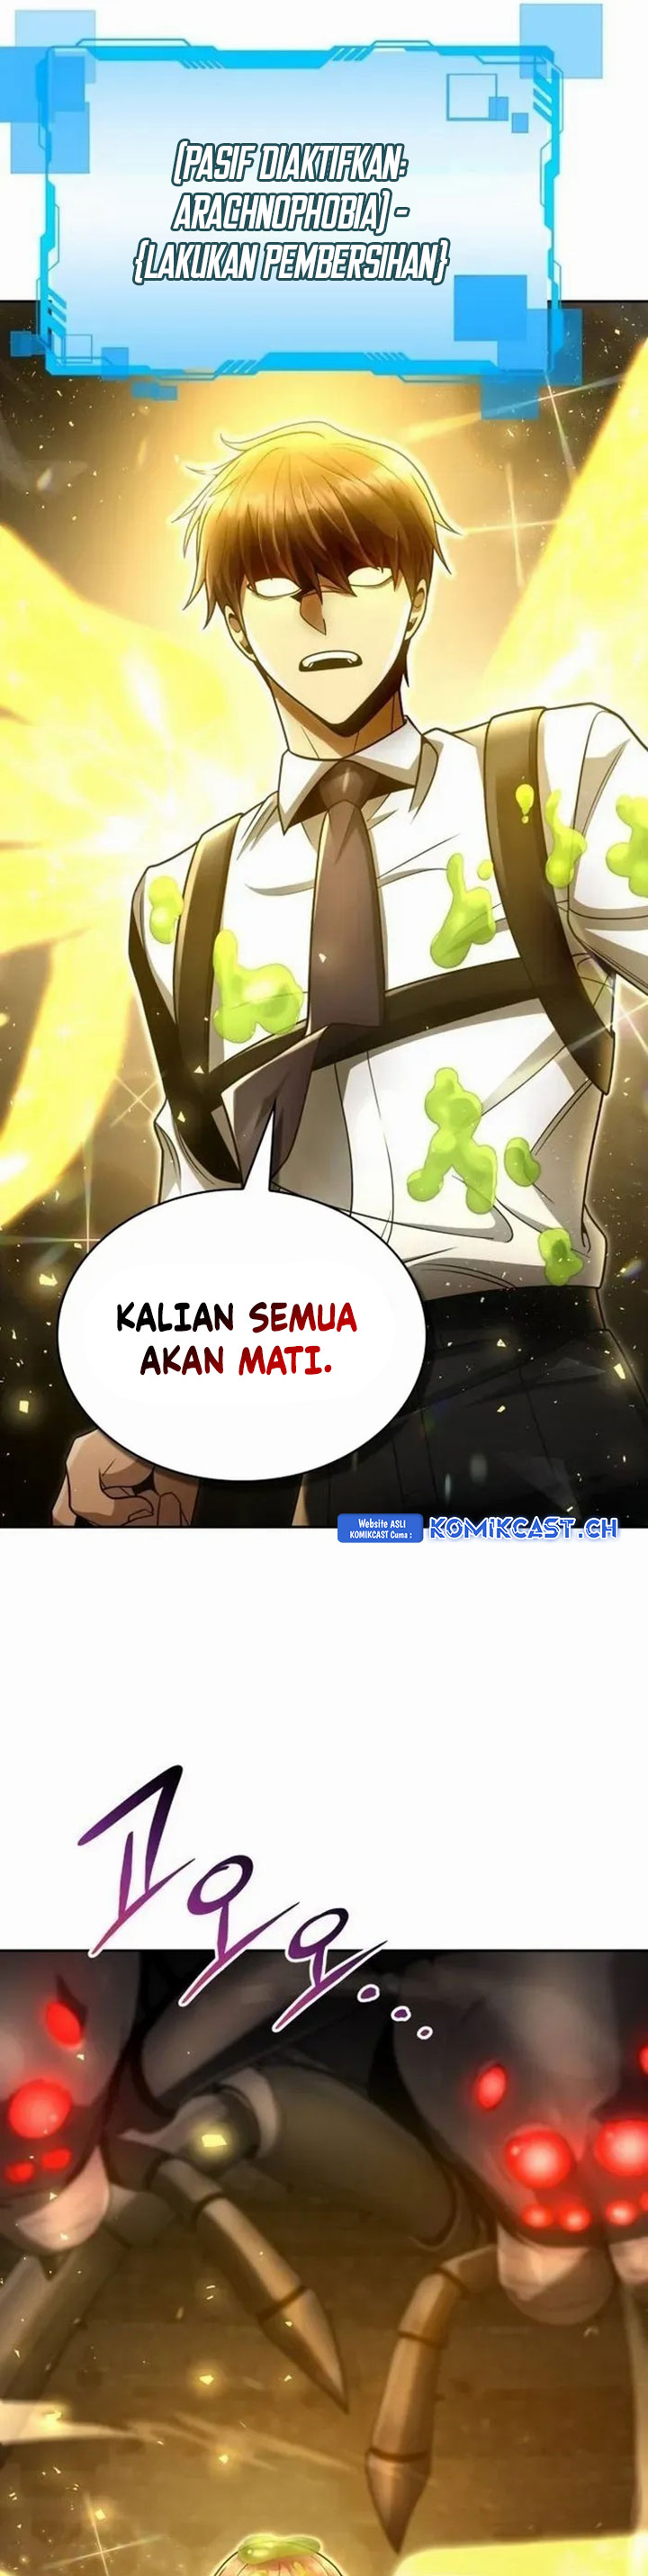 Dilarang COPAS - situs resmi www.mangacanblog.com - Komik clever cleaning life of the returned genius hunter 049 - chapter 49 50 Indonesia clever cleaning life of the returned genius hunter 049 - chapter 49 Terbaru 11|Baca Manga Komik Indonesia|Mangacan